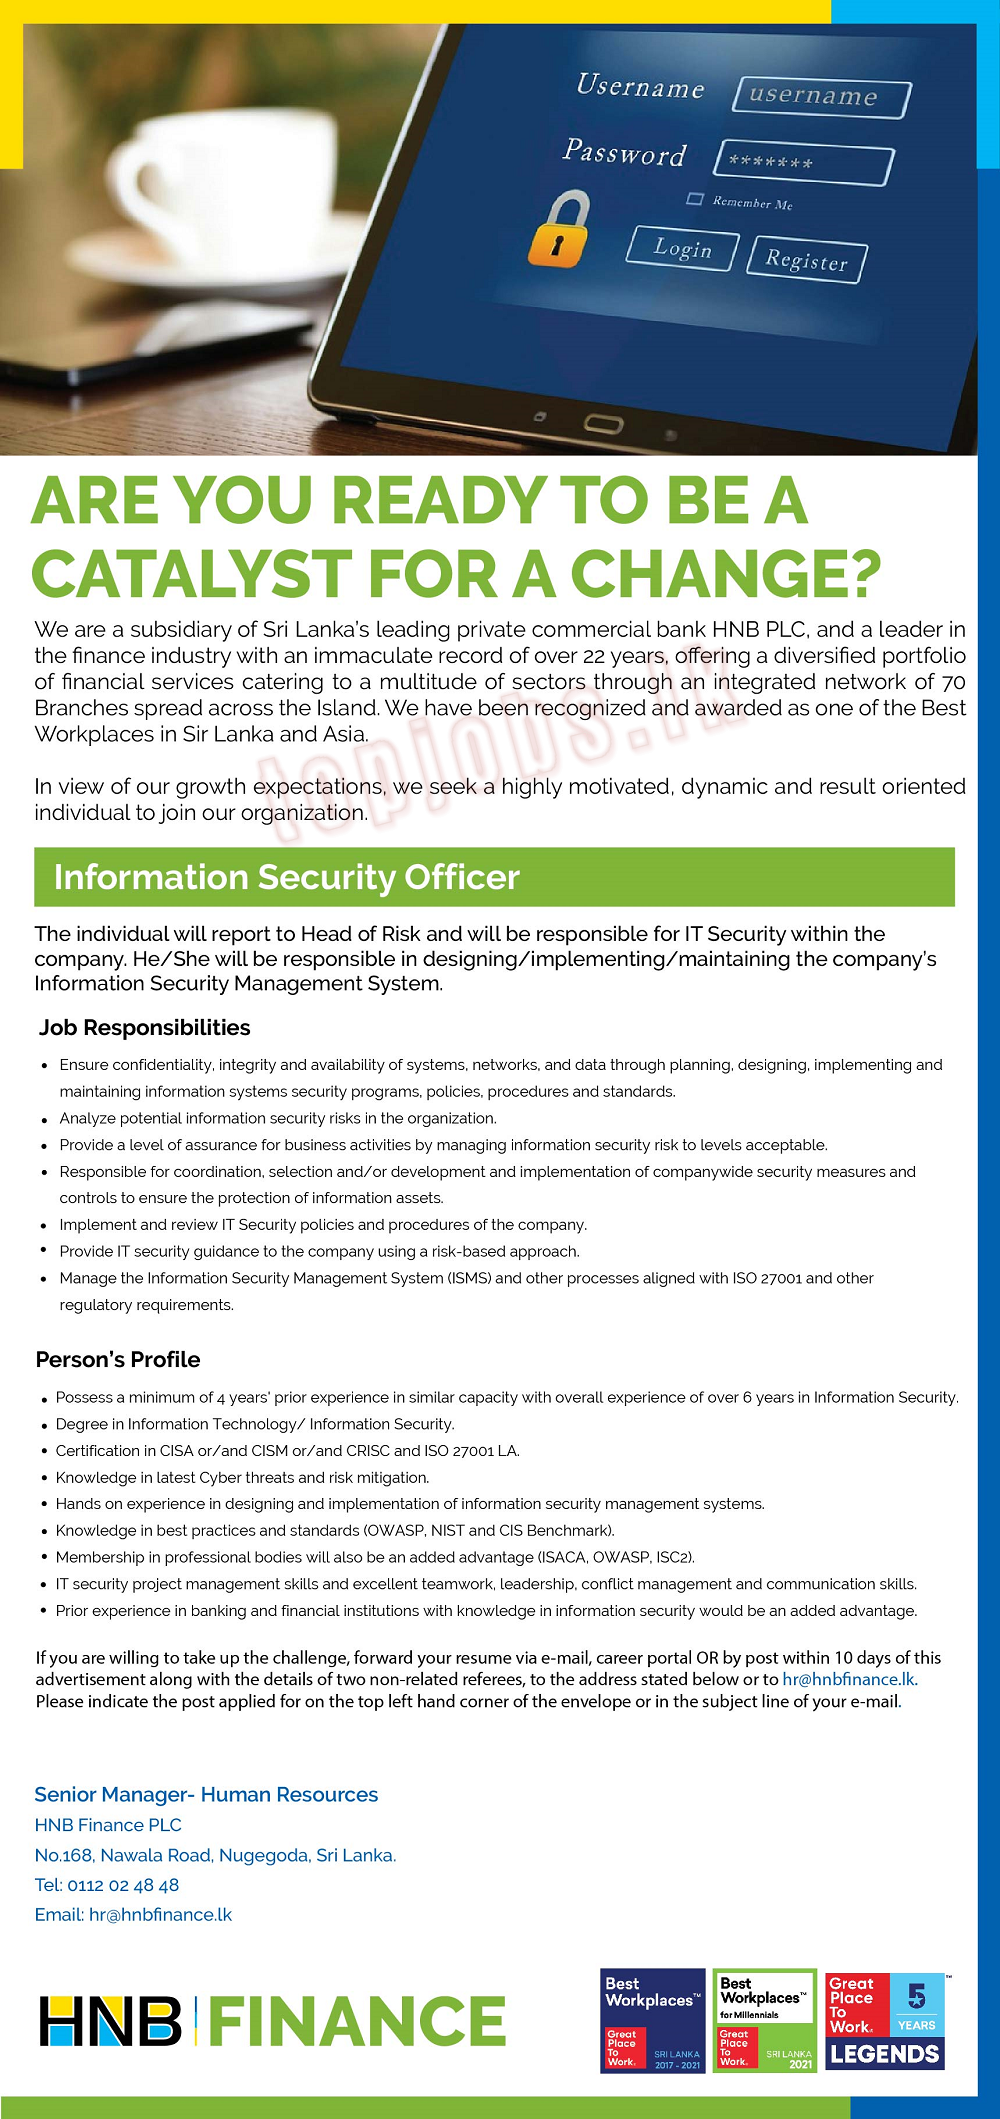 Information Security Officer Vacancy in HNB Finance PLC